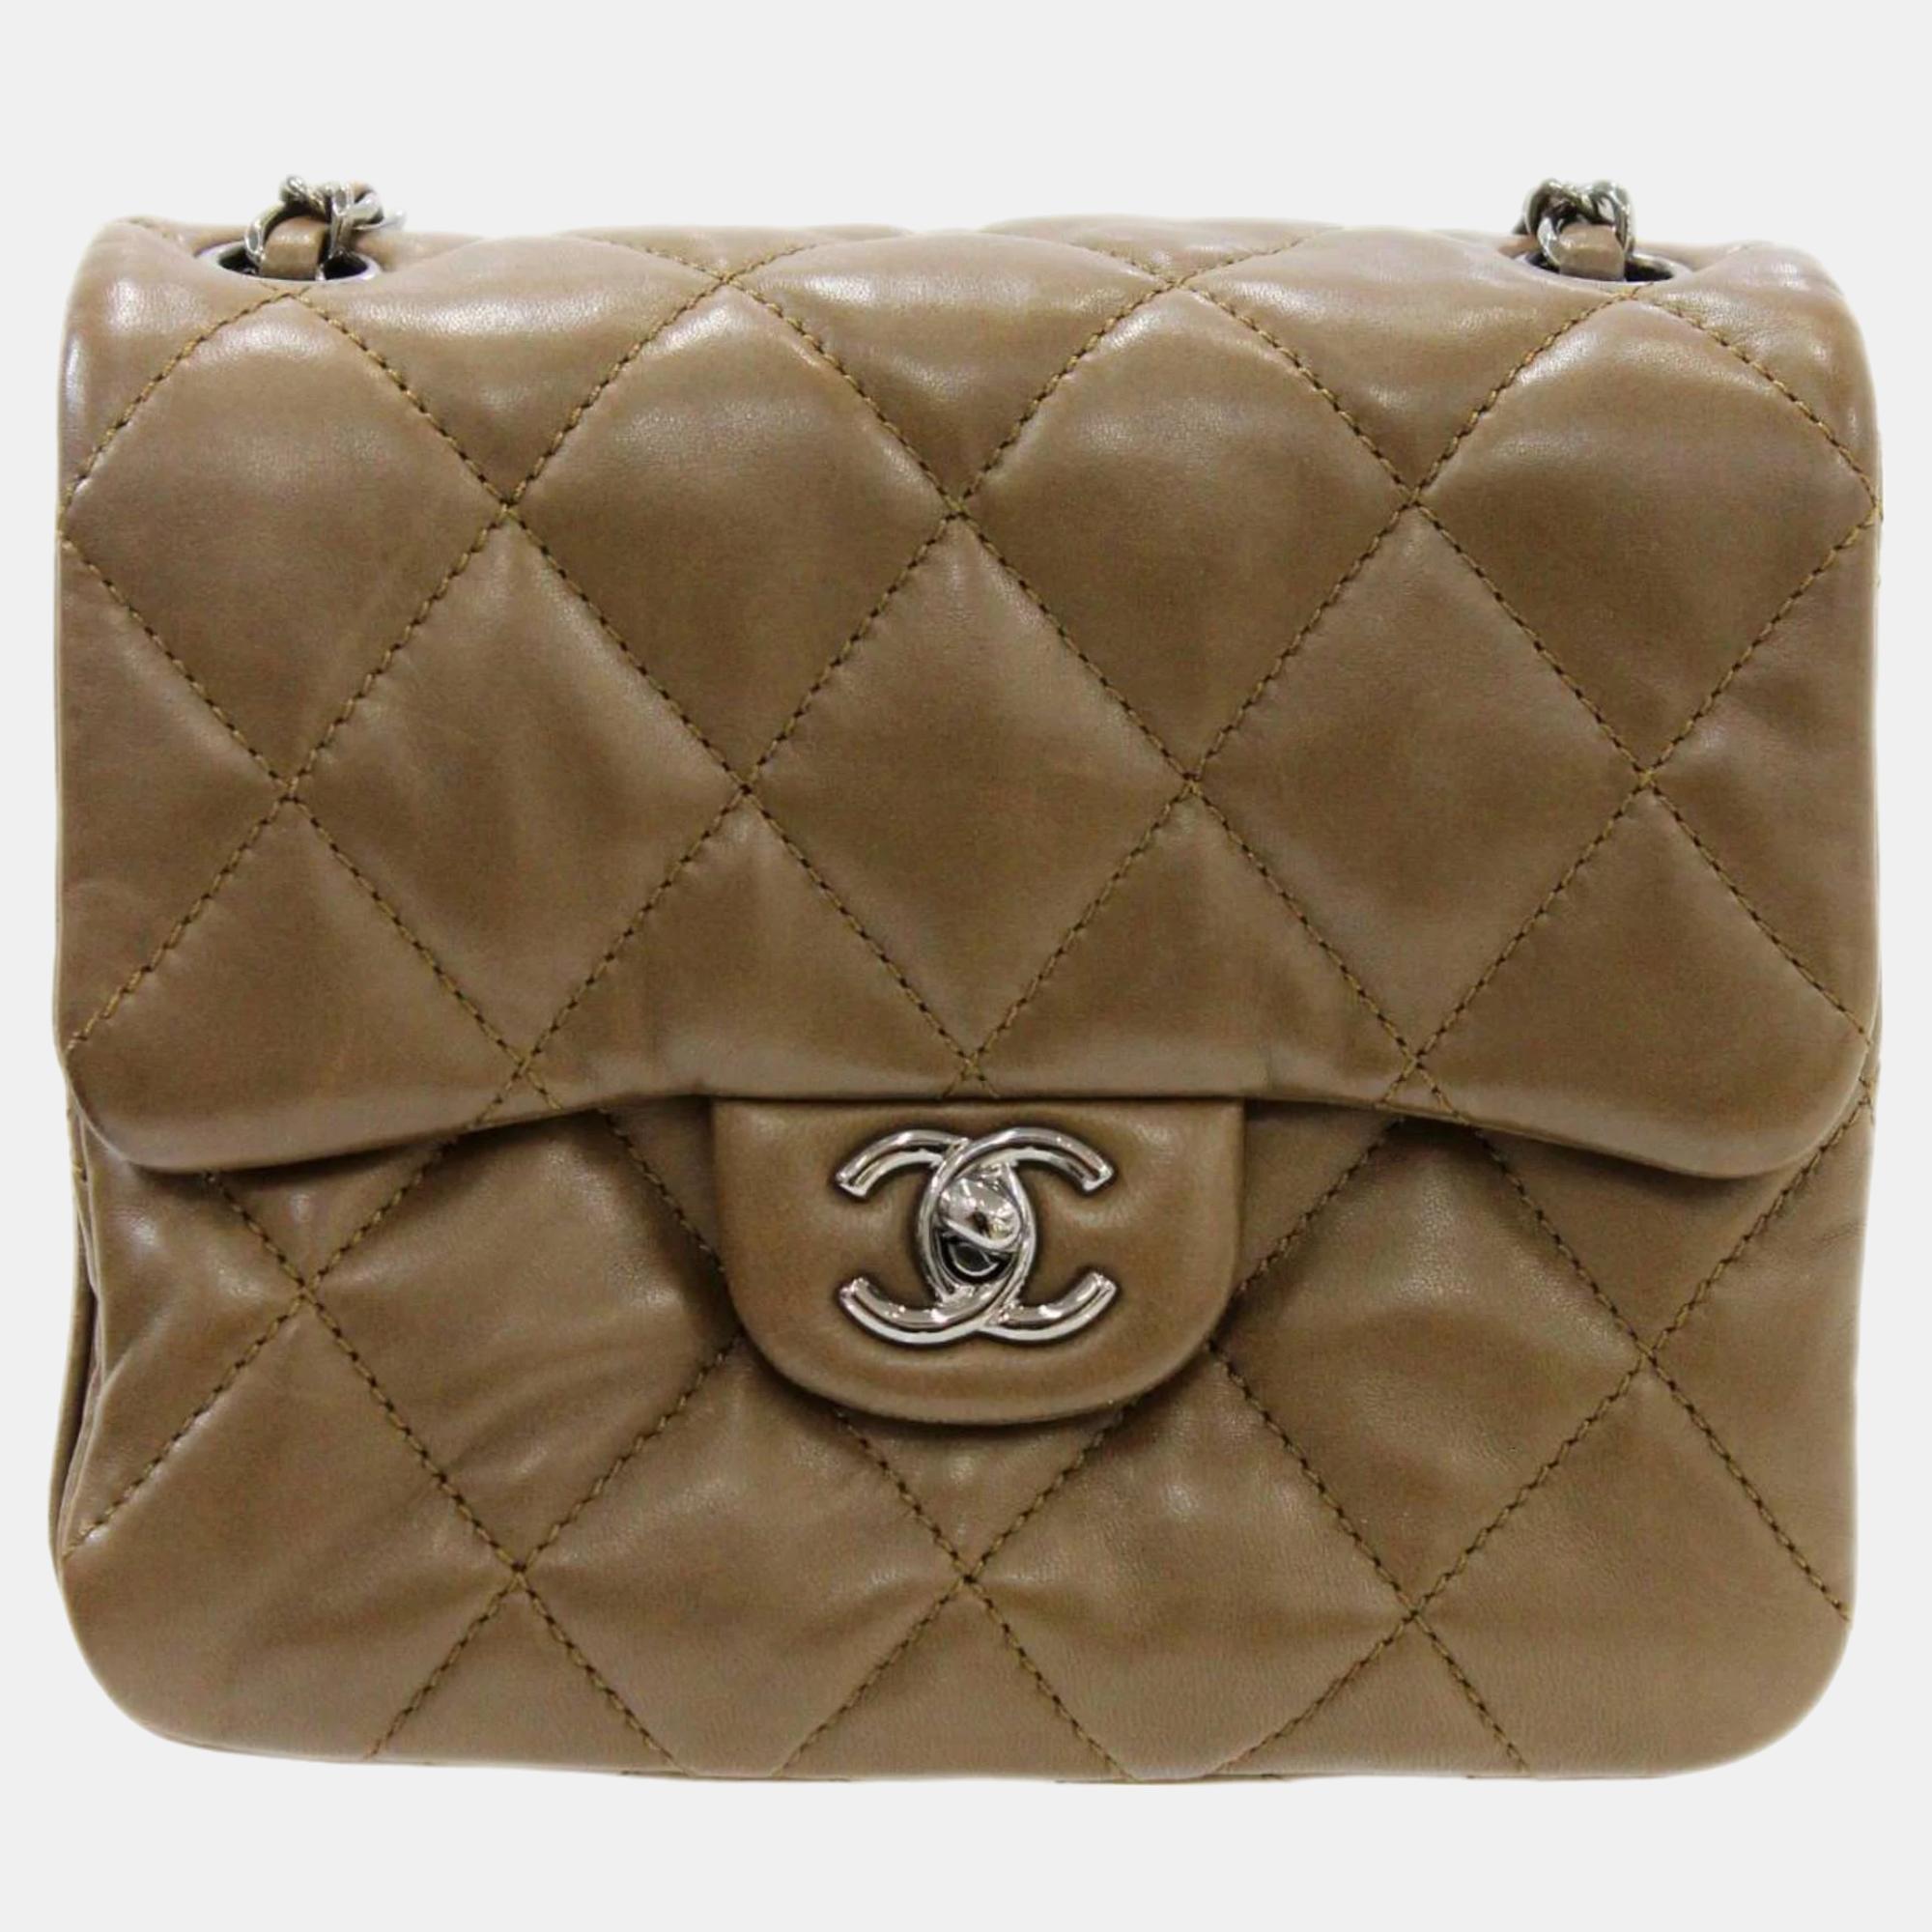 Experience luxury with this Chanel bag. Meticulously crafted with the best materials its a timeless piece that will elevate any outfit.